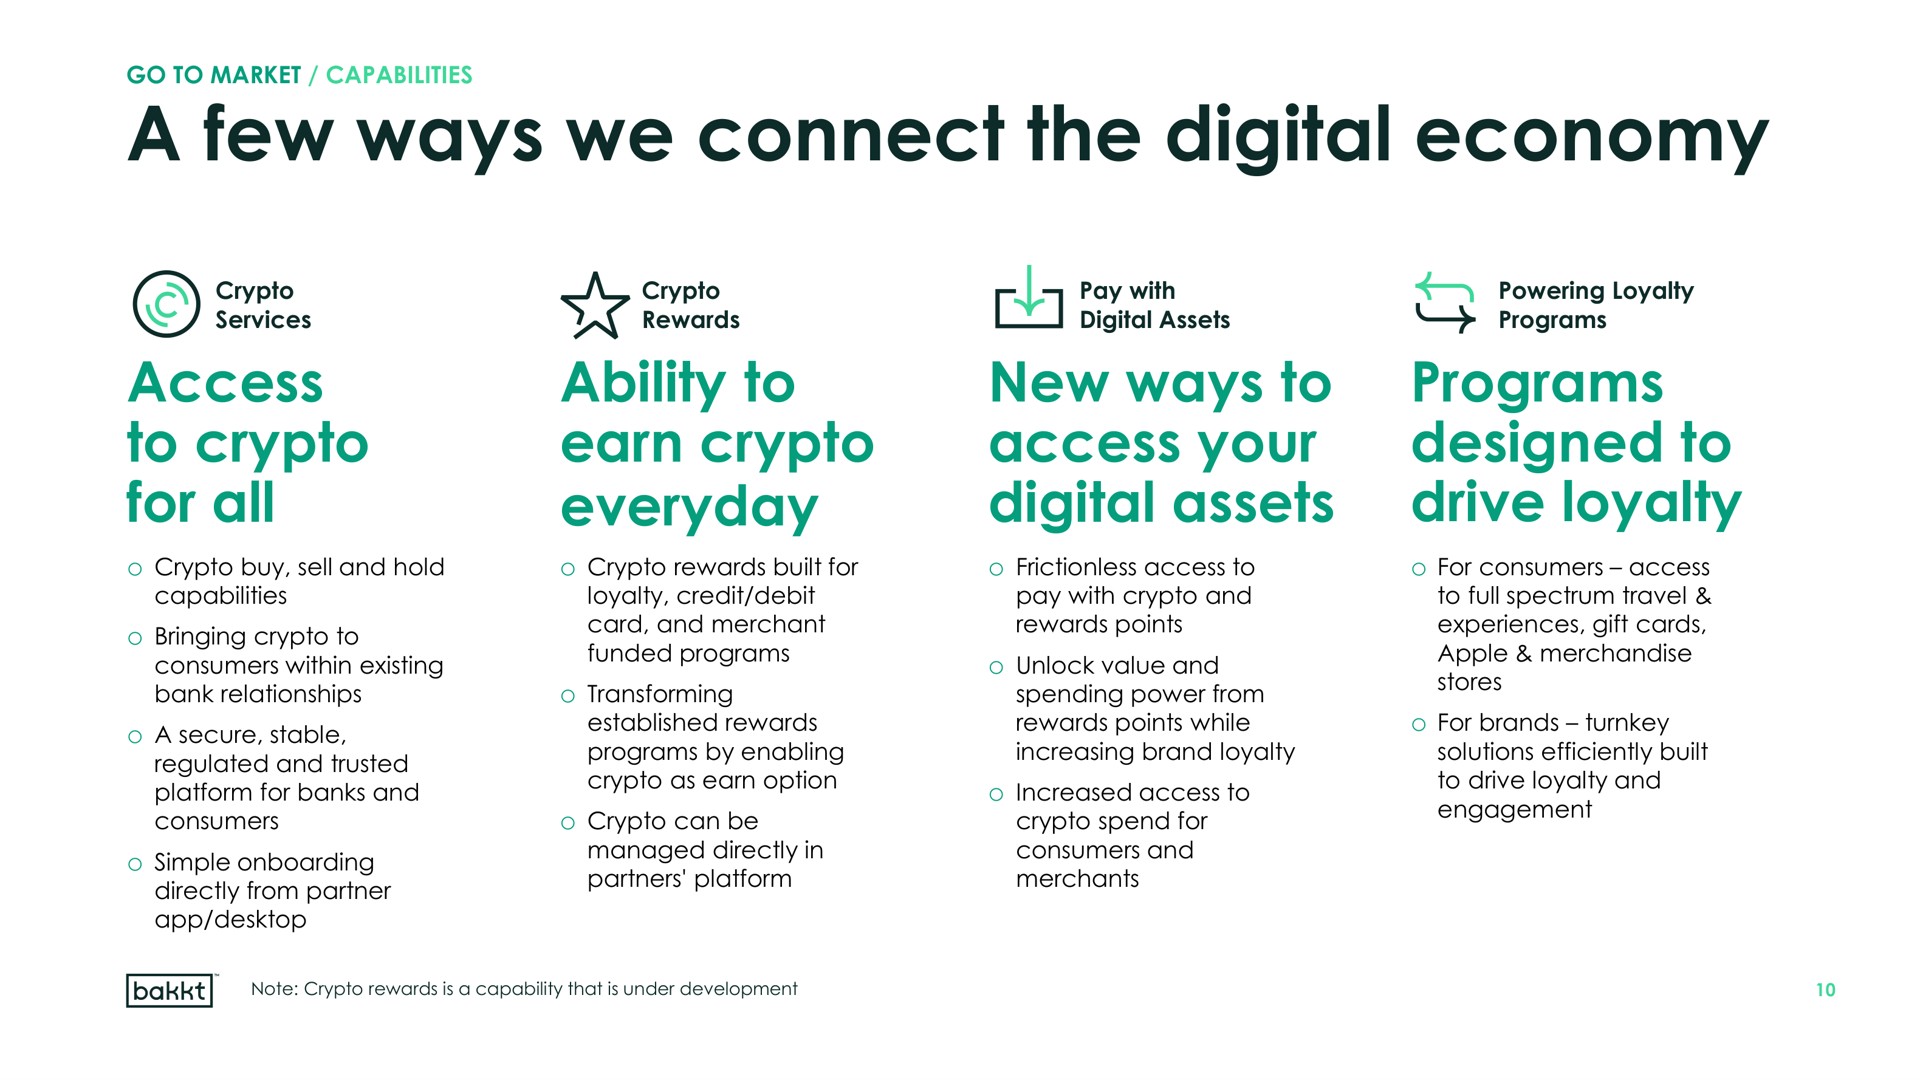 a few ways we connect the digital economy access to for all ability to earn everyday new ways to access your digital assets programs designed to drive loyalty she toy | Bakkt